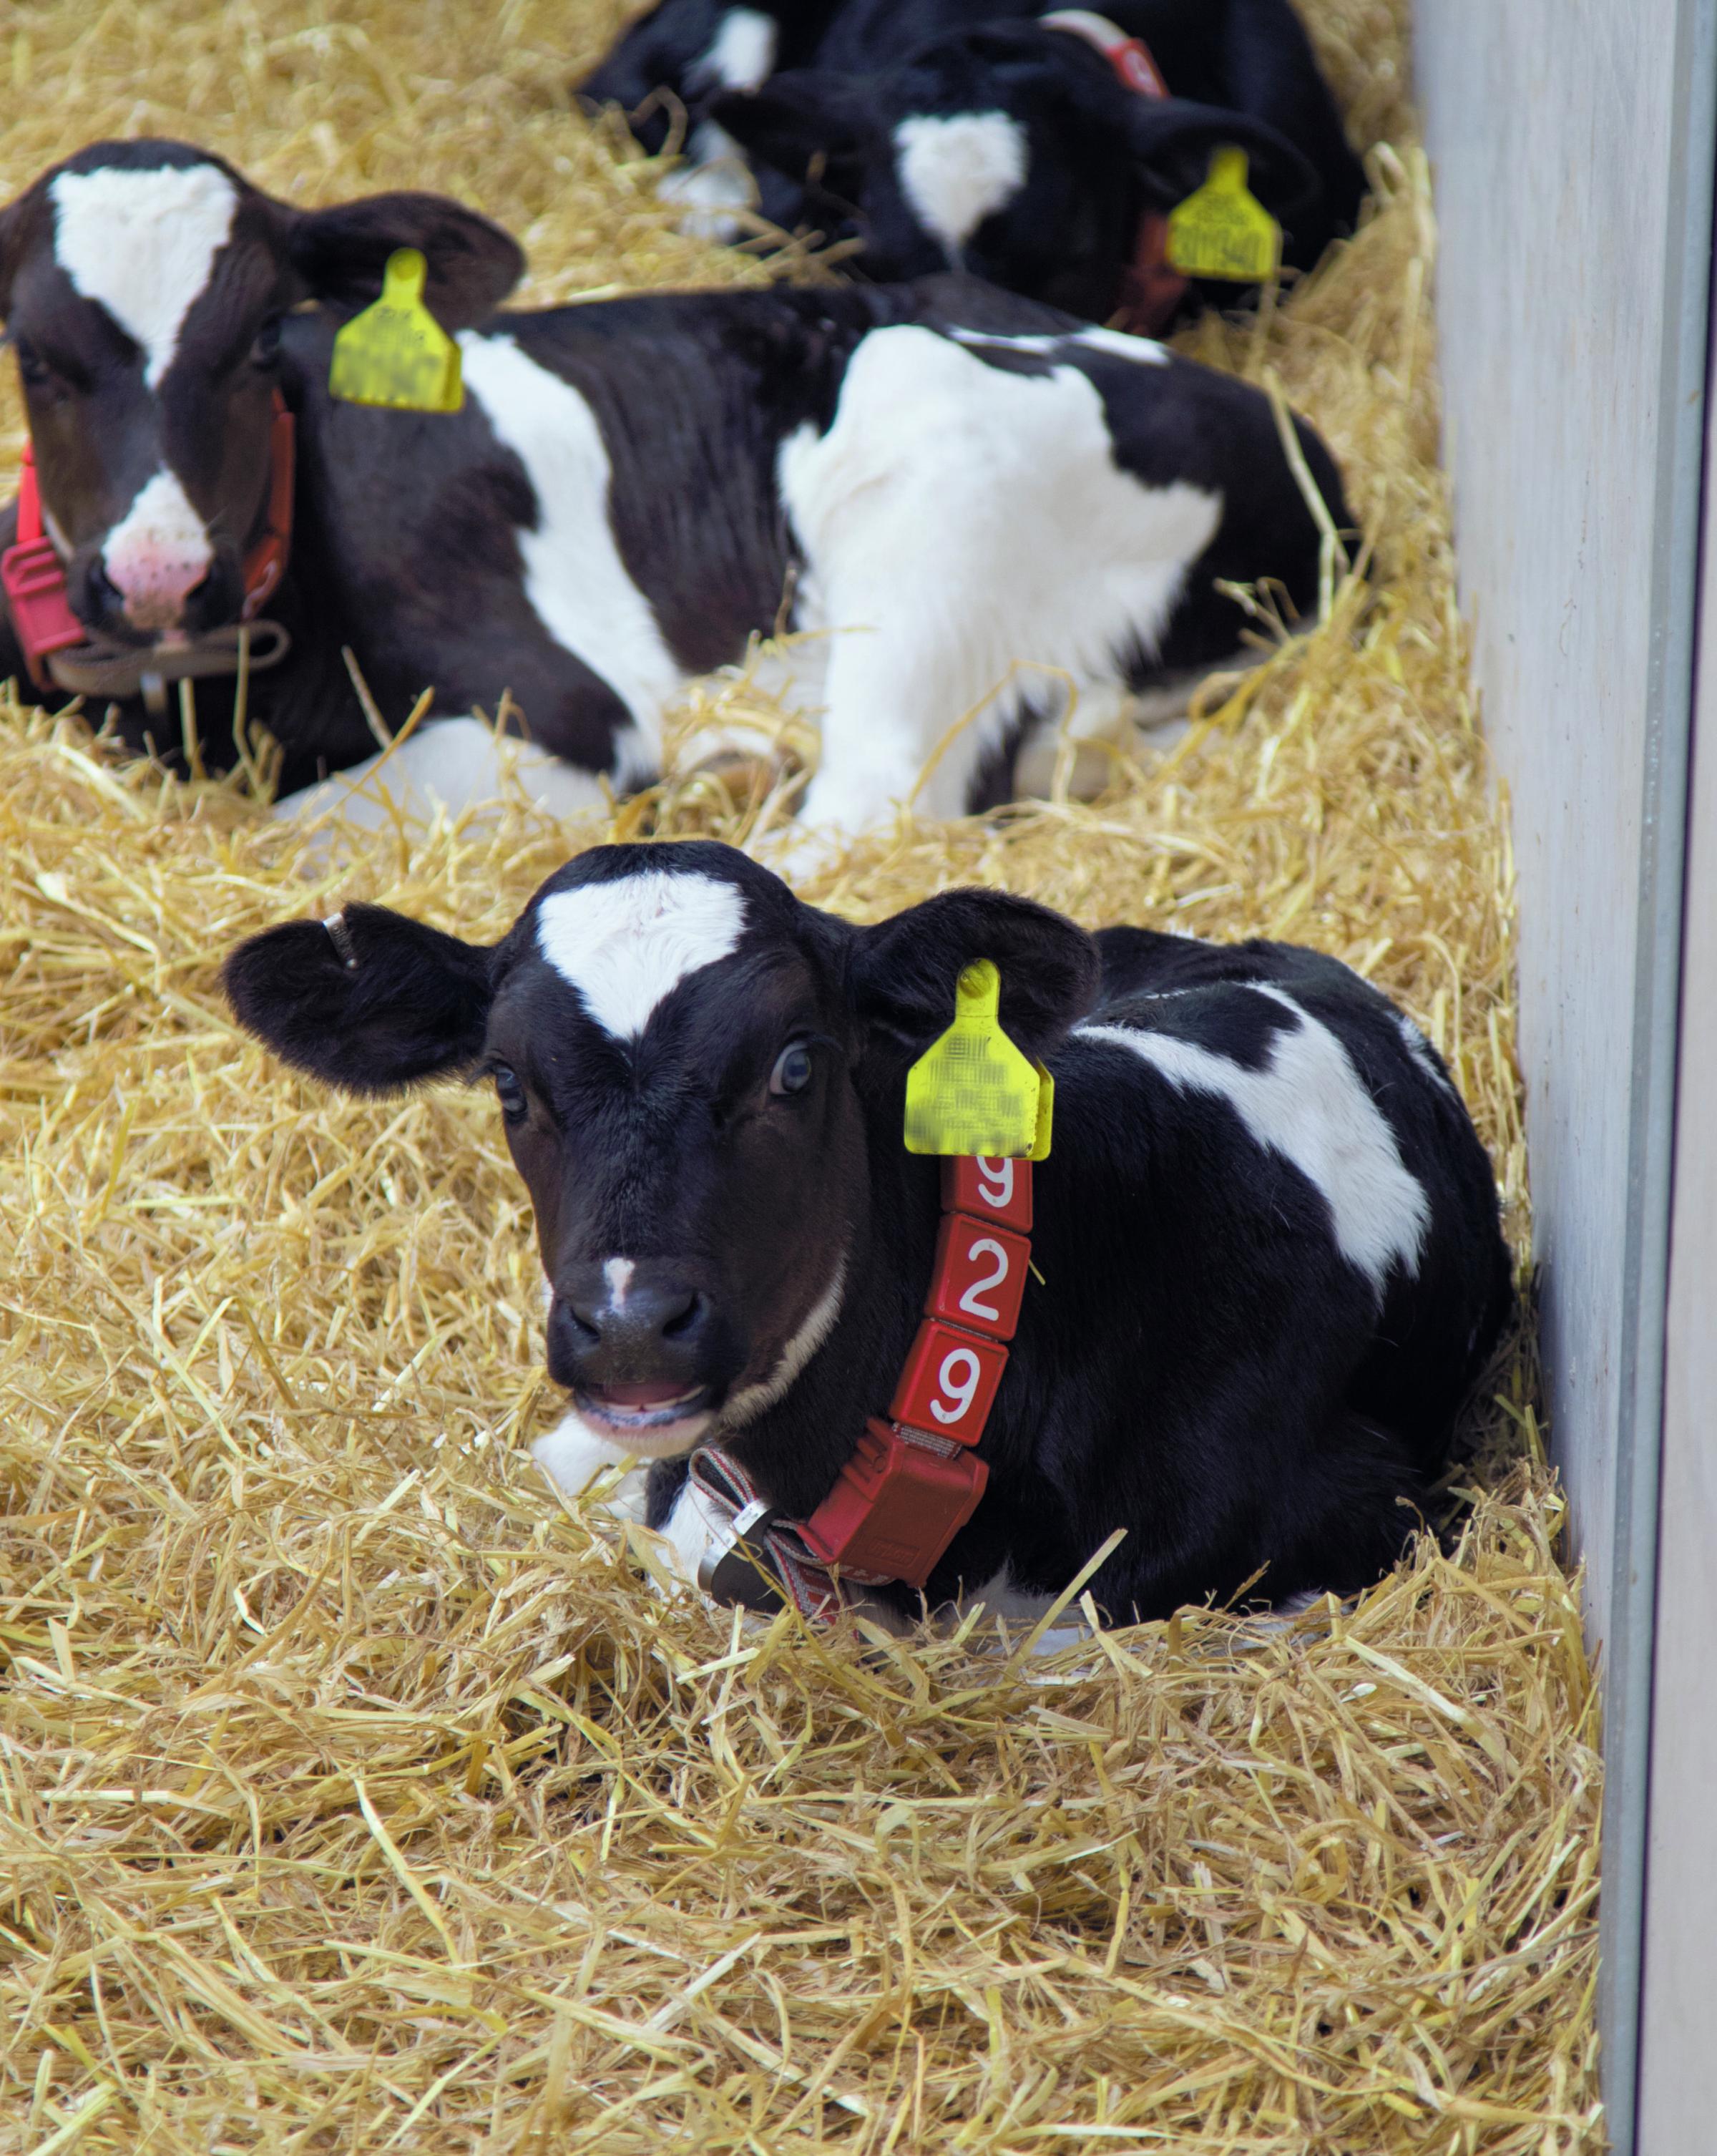 During the first two months of its life, a dairy heifer calf is able to turn 100g of feed into 50g of growth, but as the animal ages this diminishes steadily